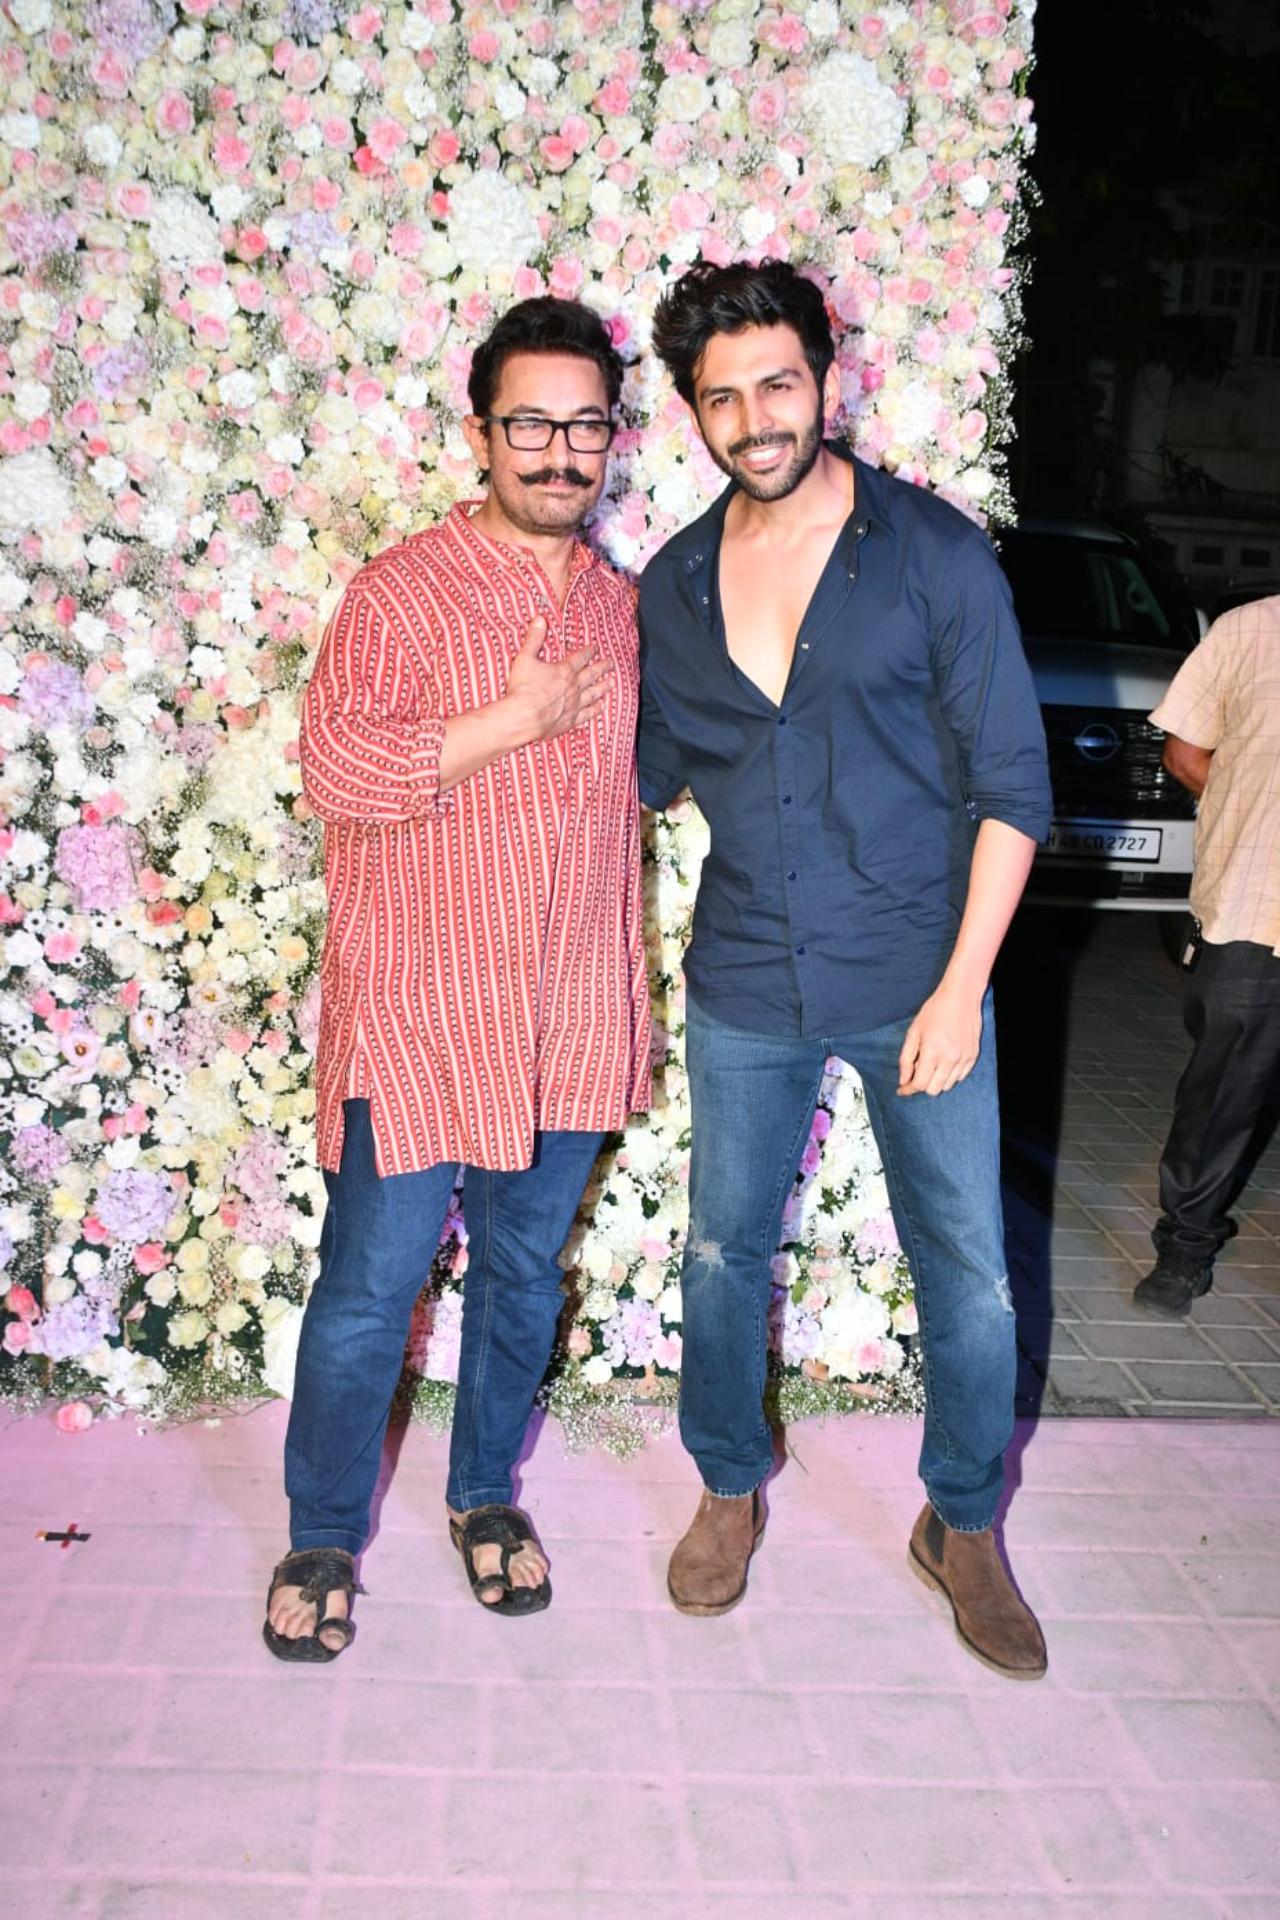 At Aayush Sharma and Arpita Khan's Eid party on Saturday night, Aamir Khan and Kartik Aaryan bumped into each other. The duo who belong to different generation of actors were seen chatting and hugging each other outside the venue. Earlier, Kartik and Aamir had attended a wedding where they were seen dancing together. See more pics from the big Eid party here